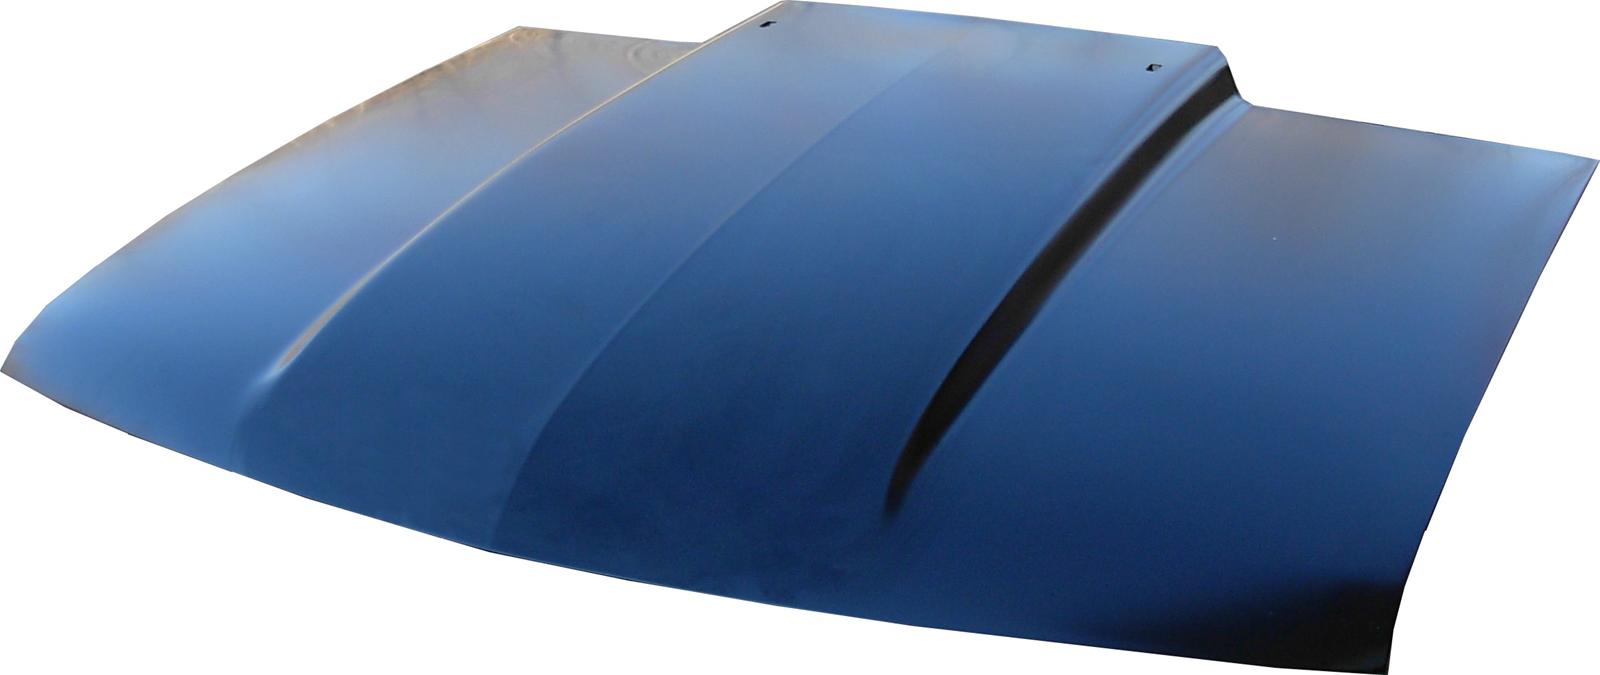  Auto Metal Direct 300-4182-4 4 Cowl Induction Hood